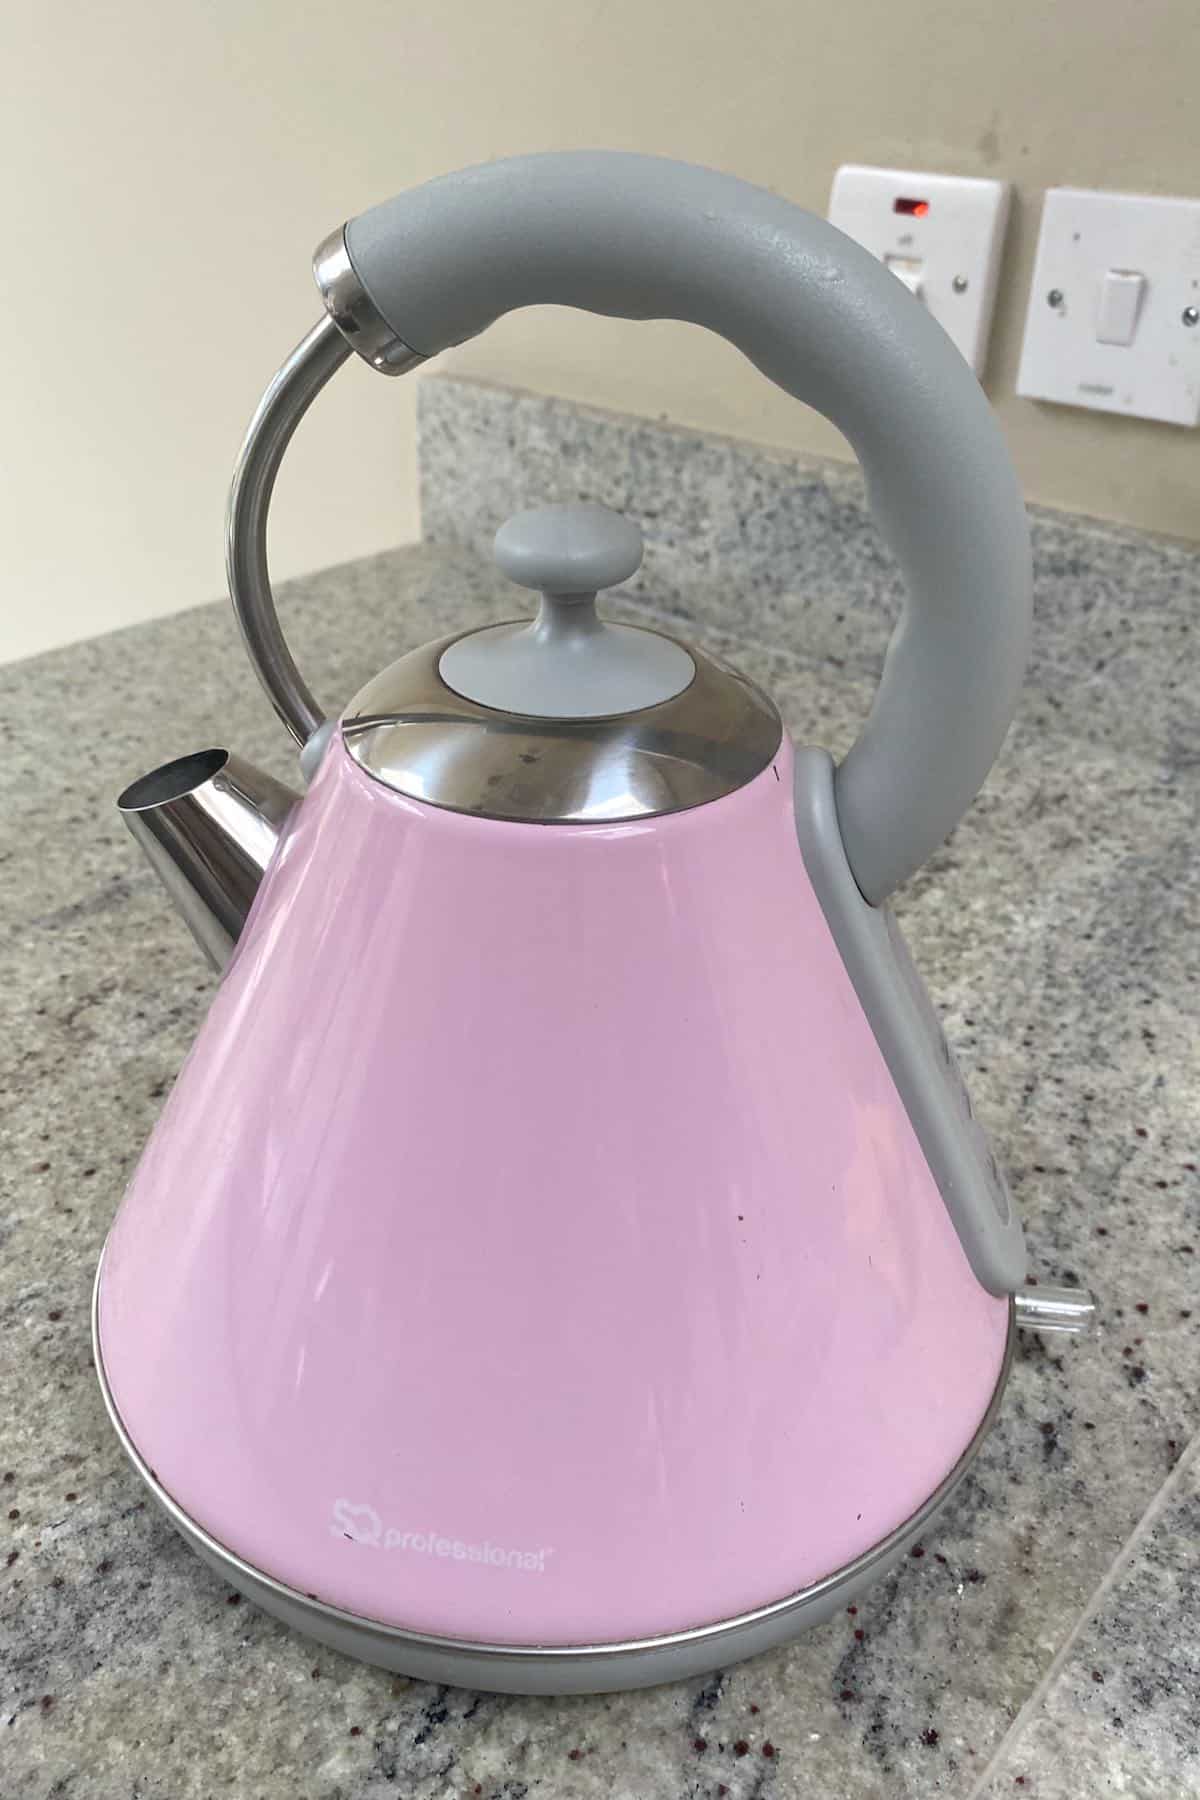 https://www.alphafoodie.com/wp-content/uploads/2021/05/How-to-naturally-clean-the-kettle-Freshly-cleaning-kettle.jpeg